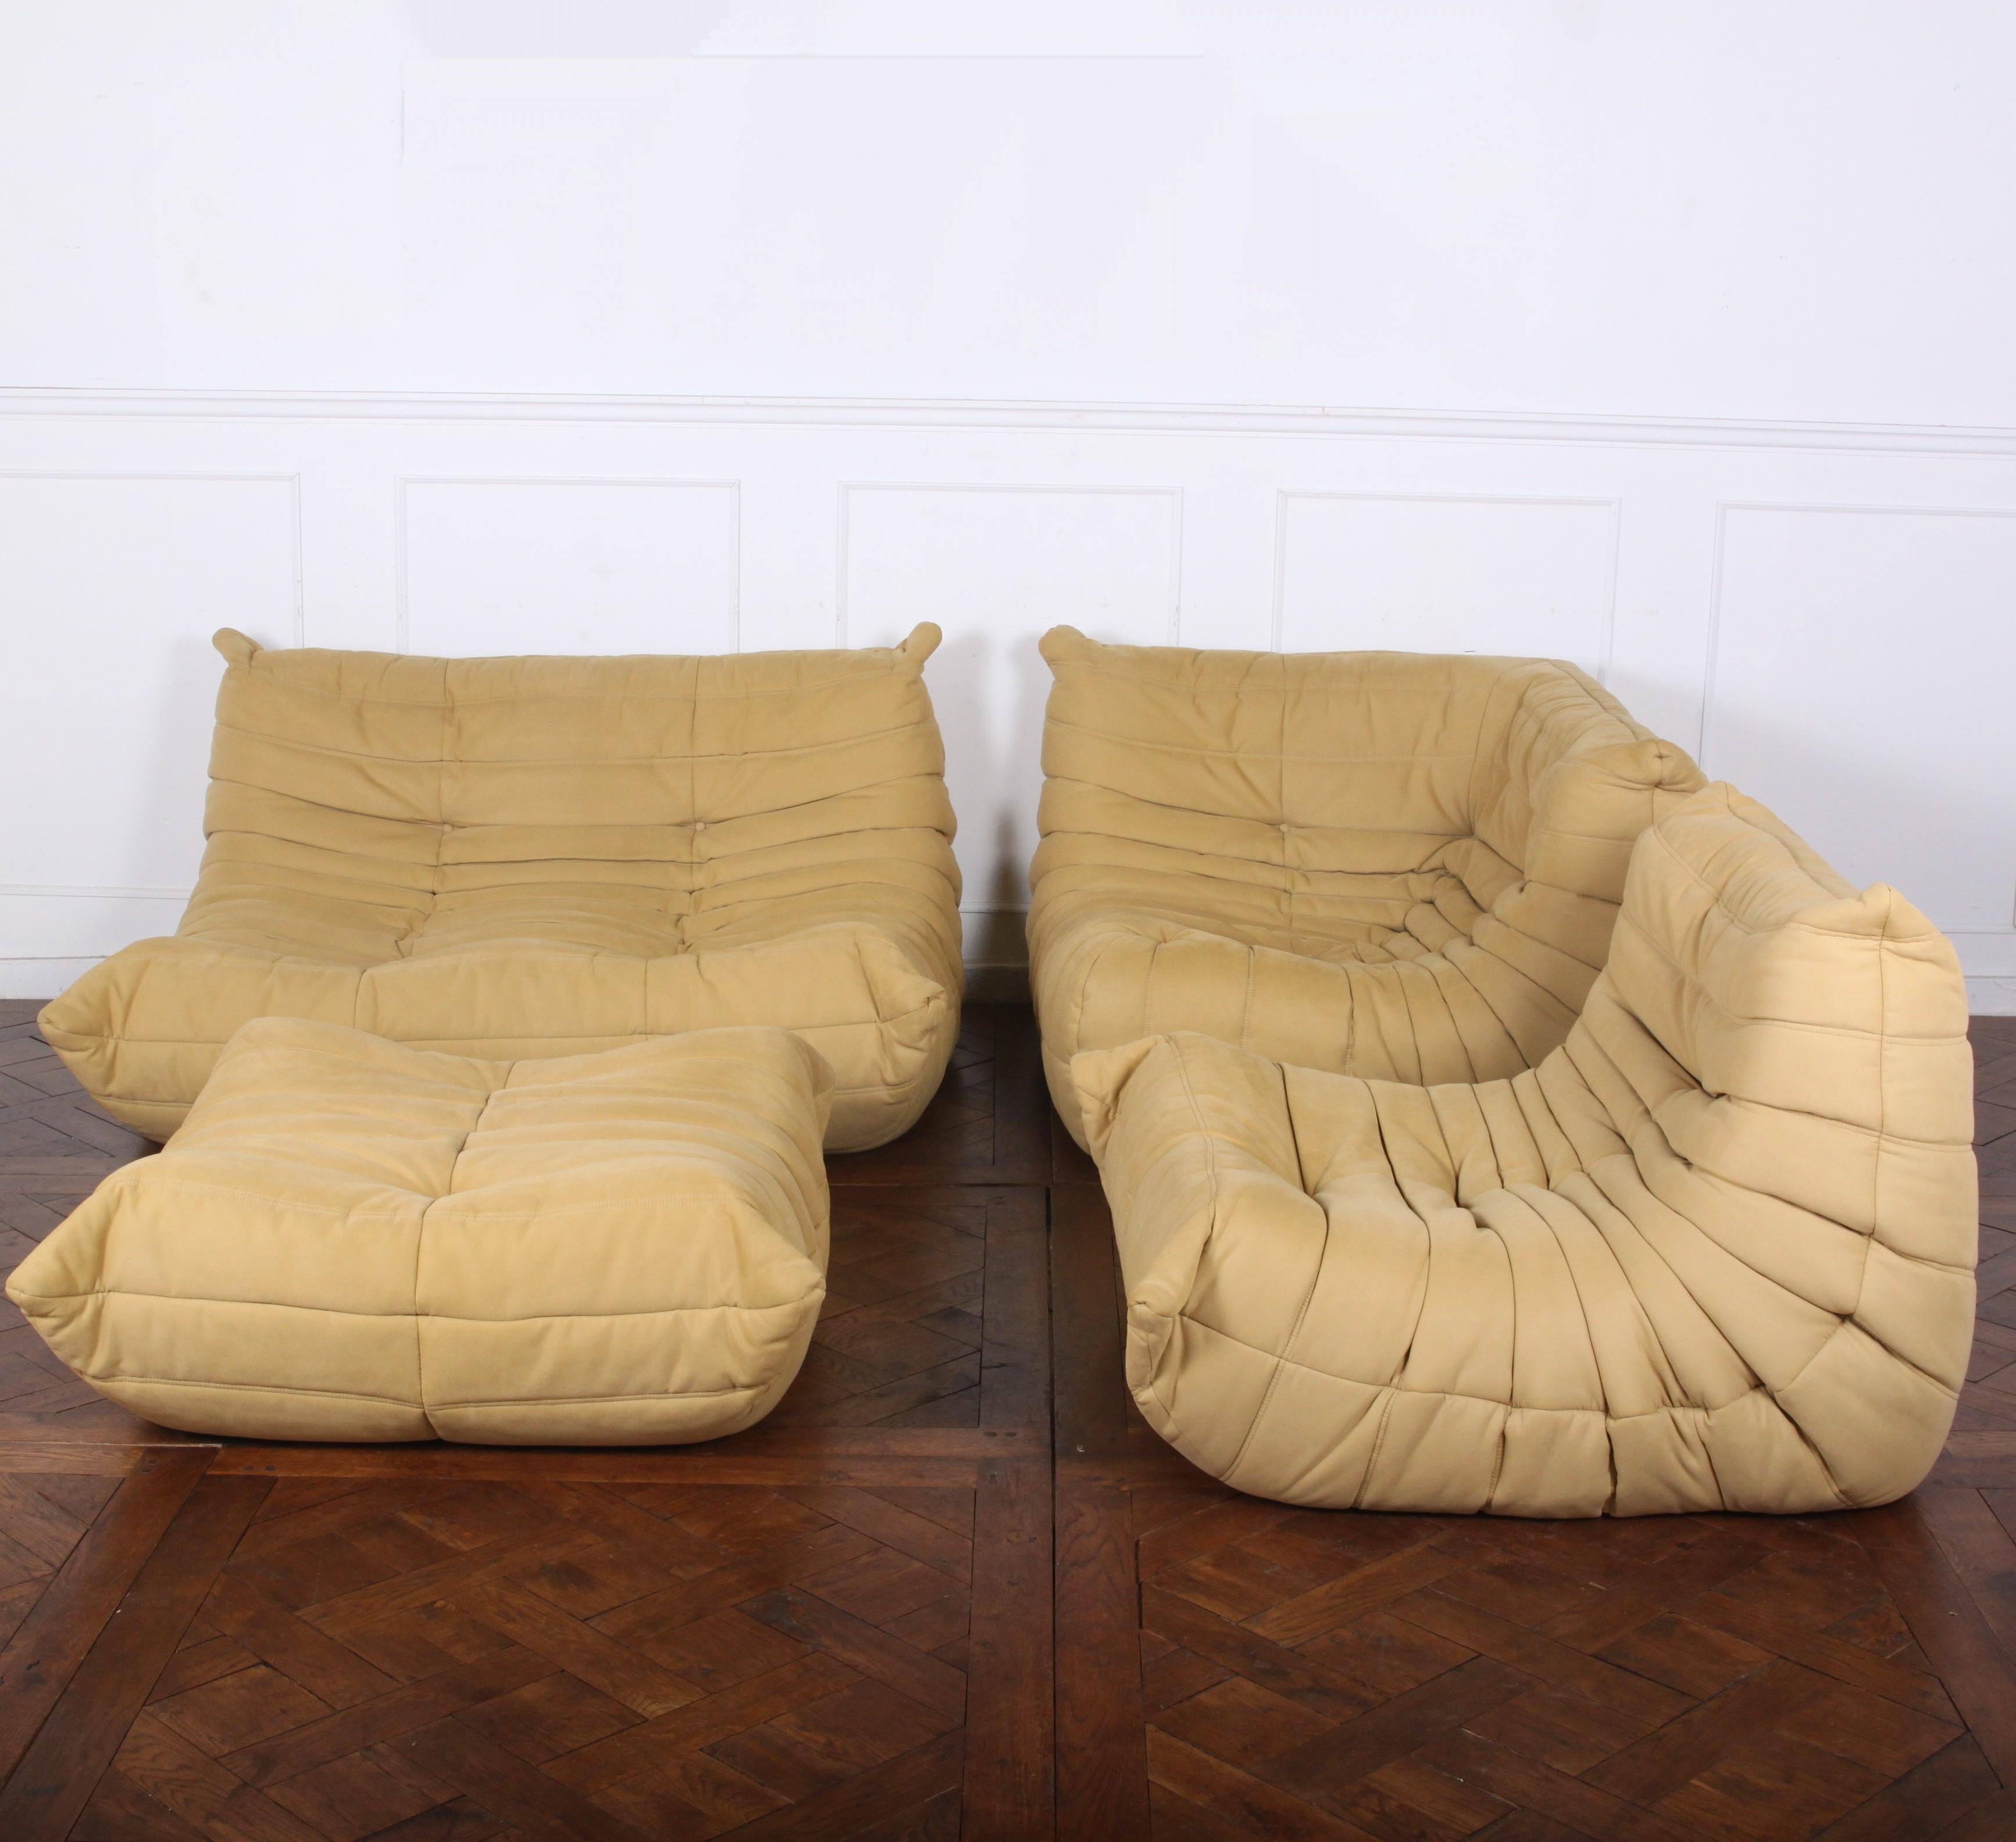 A four-piece vintage ‘Togo’ sofa suite in beige microfiber, consisting of a sofa, corner chair, chair, and pouf, all in perfect original condition. This iconic sofa design was conceived in 1973 by Michel Ducaroy for the French maker Ligne Roset and